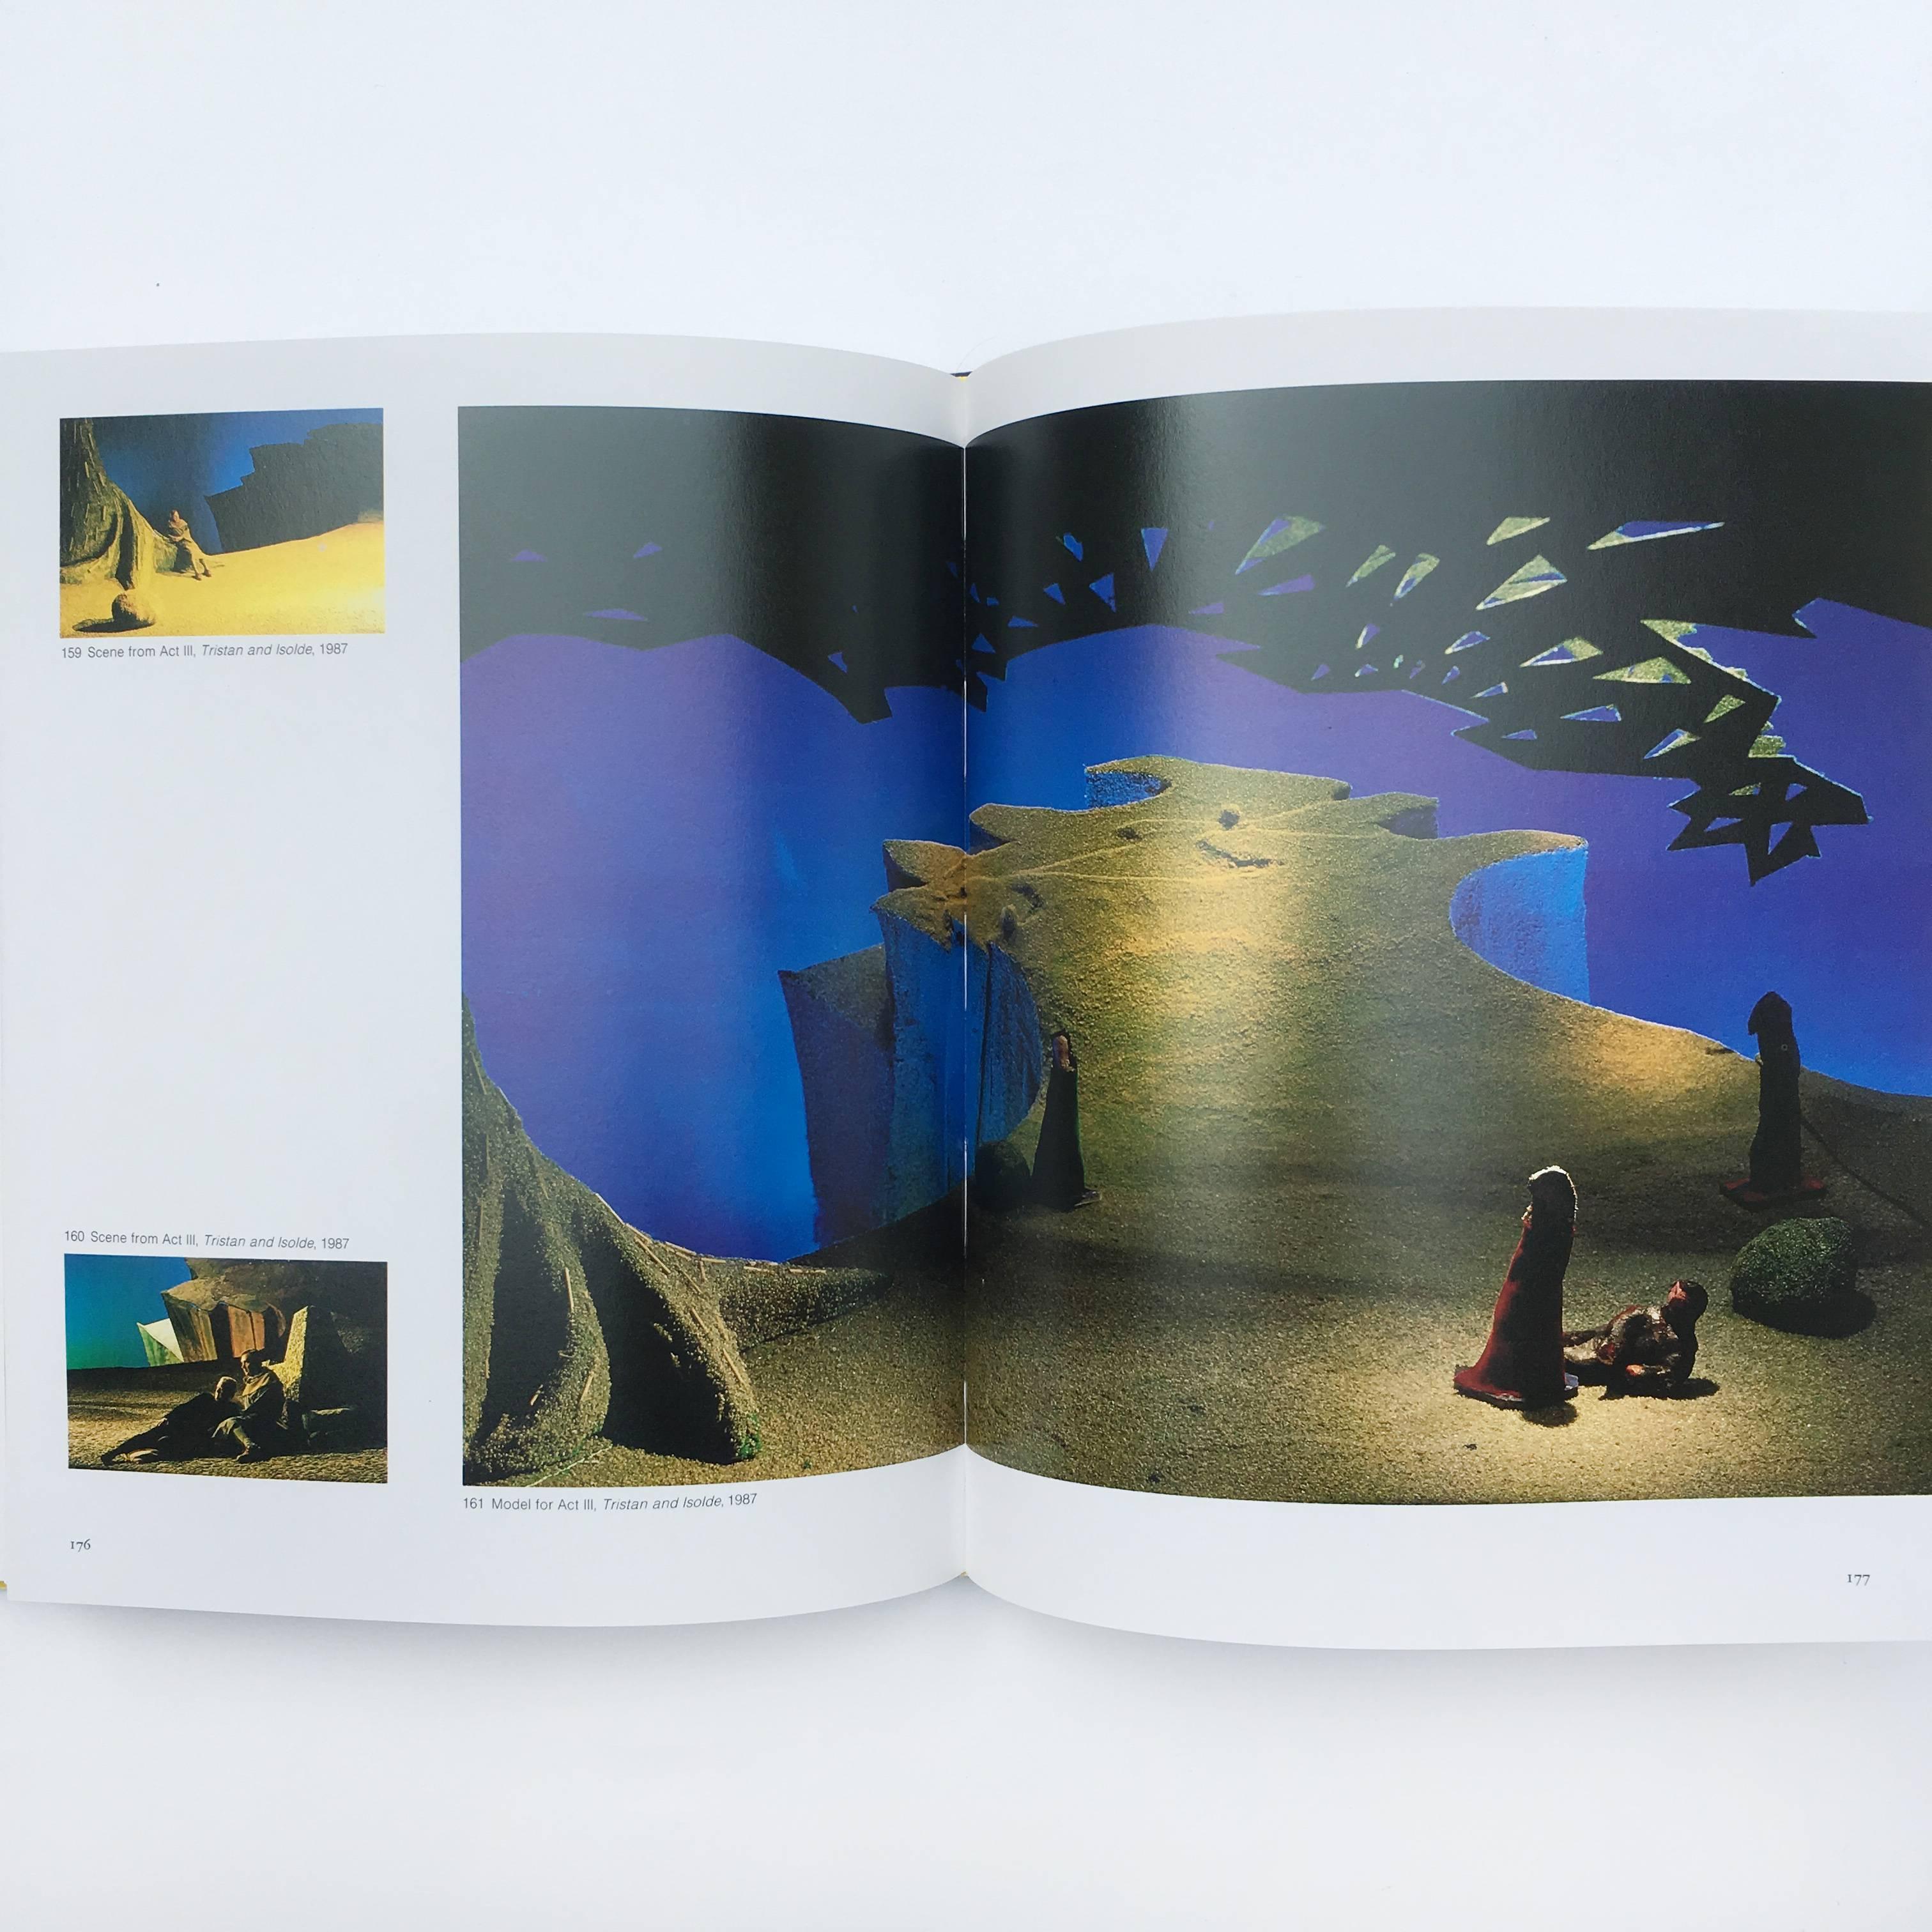 Paper David Hockney – That's The Way I See It, 1st Edition 1993